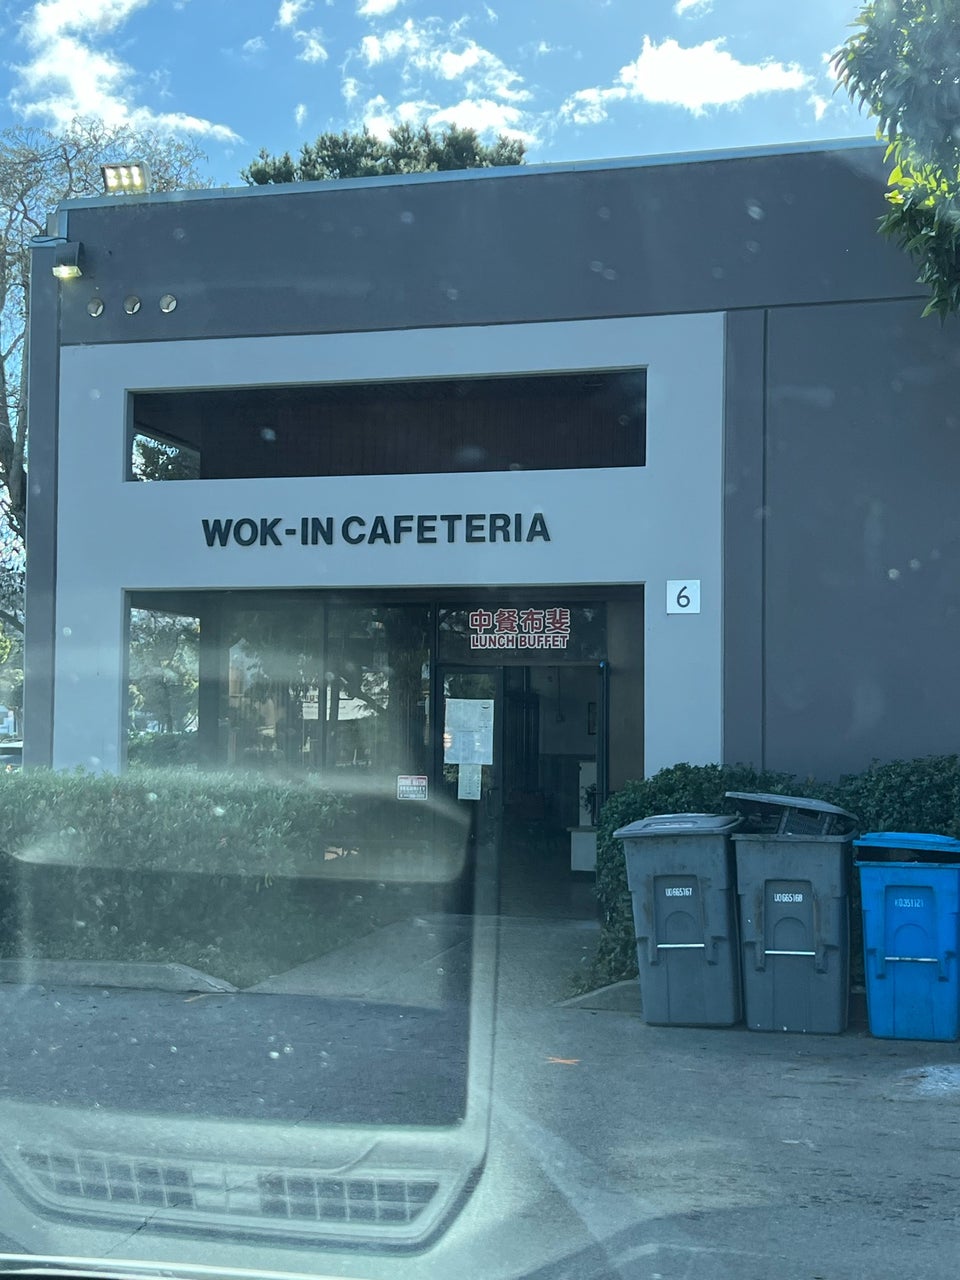 Wok-In Cafeteria